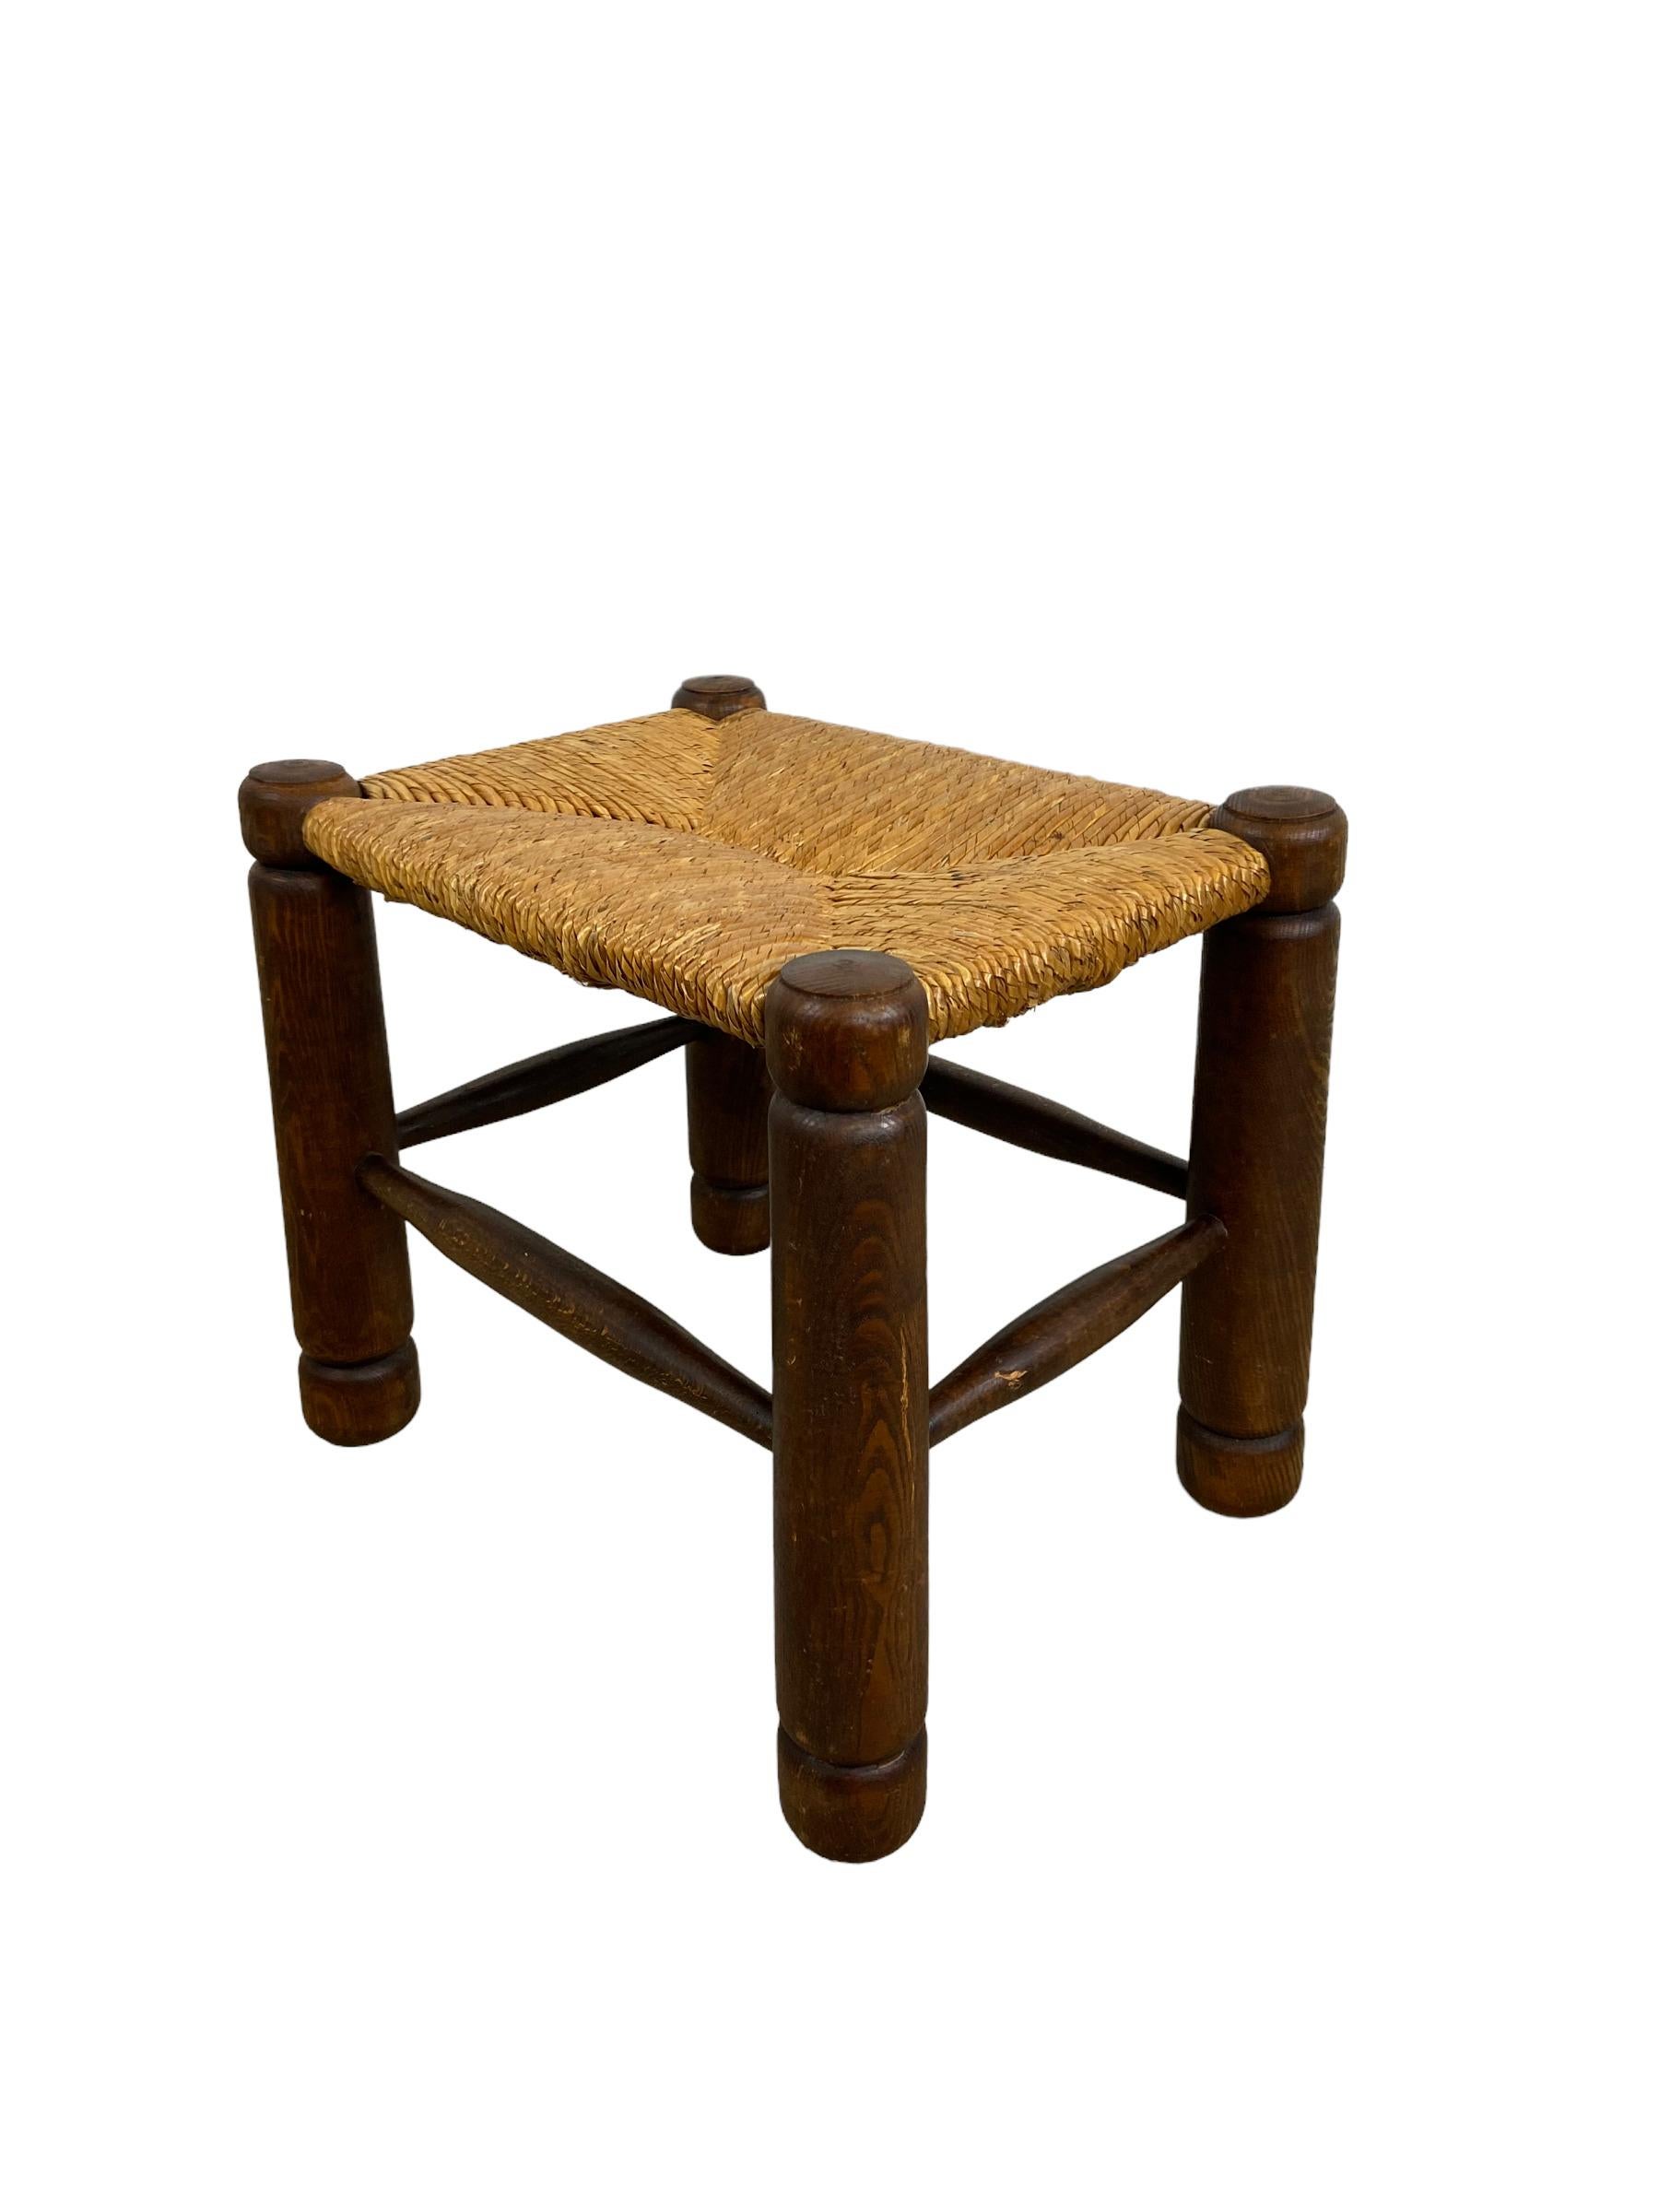 Mid-20th Century Brutalist Stool with Rush Seat For Sale